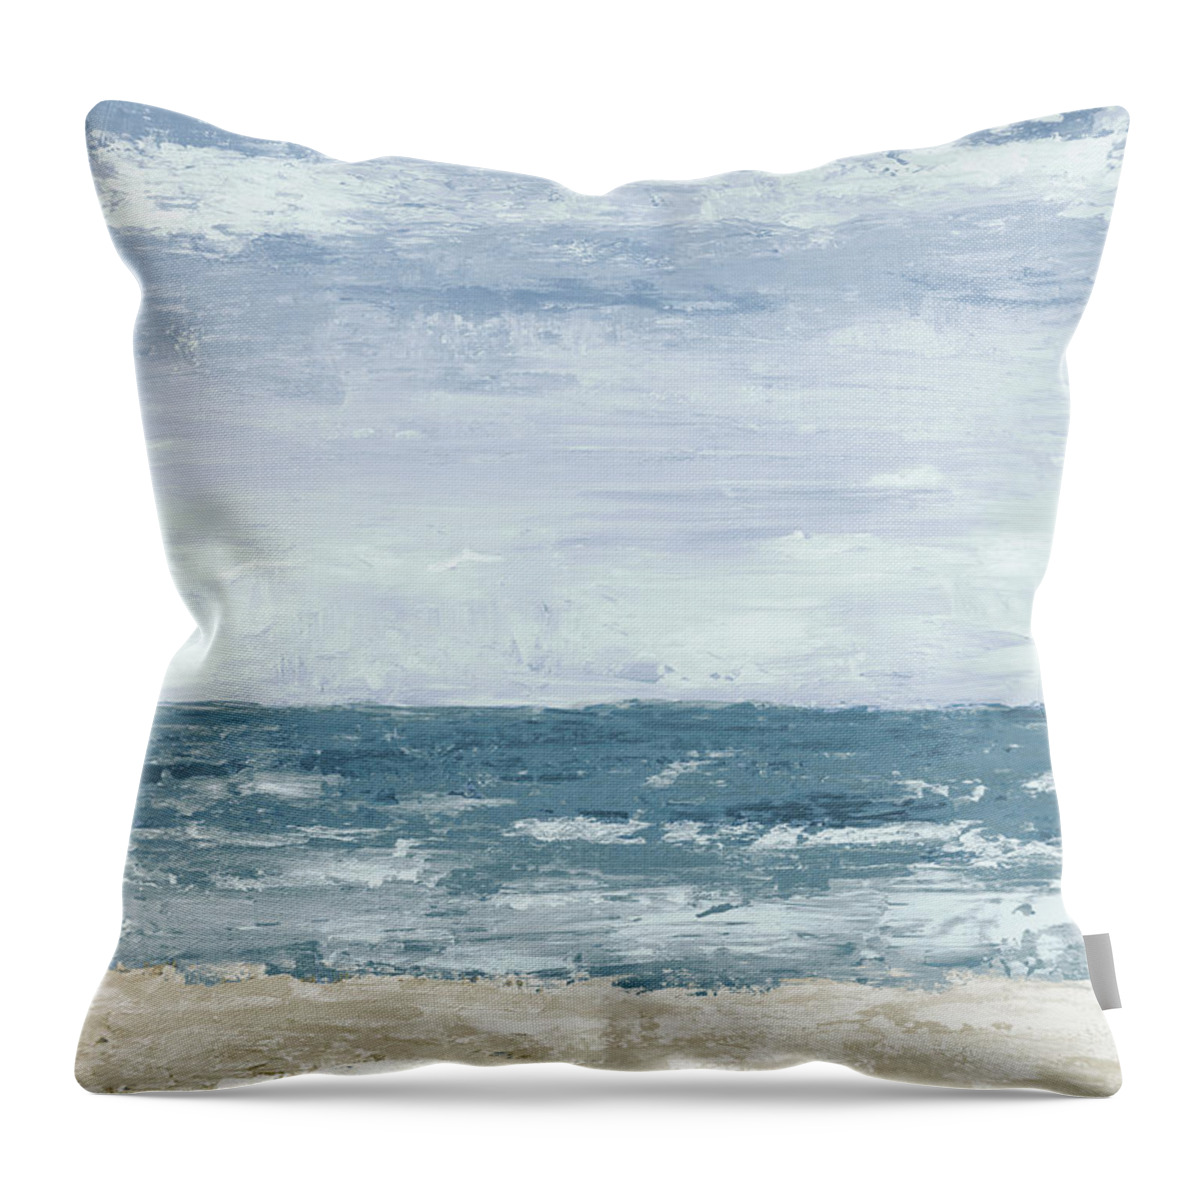 Oceans Throw Pillow featuring the painting Oceans In The Mind Vertical I by Julie Derice